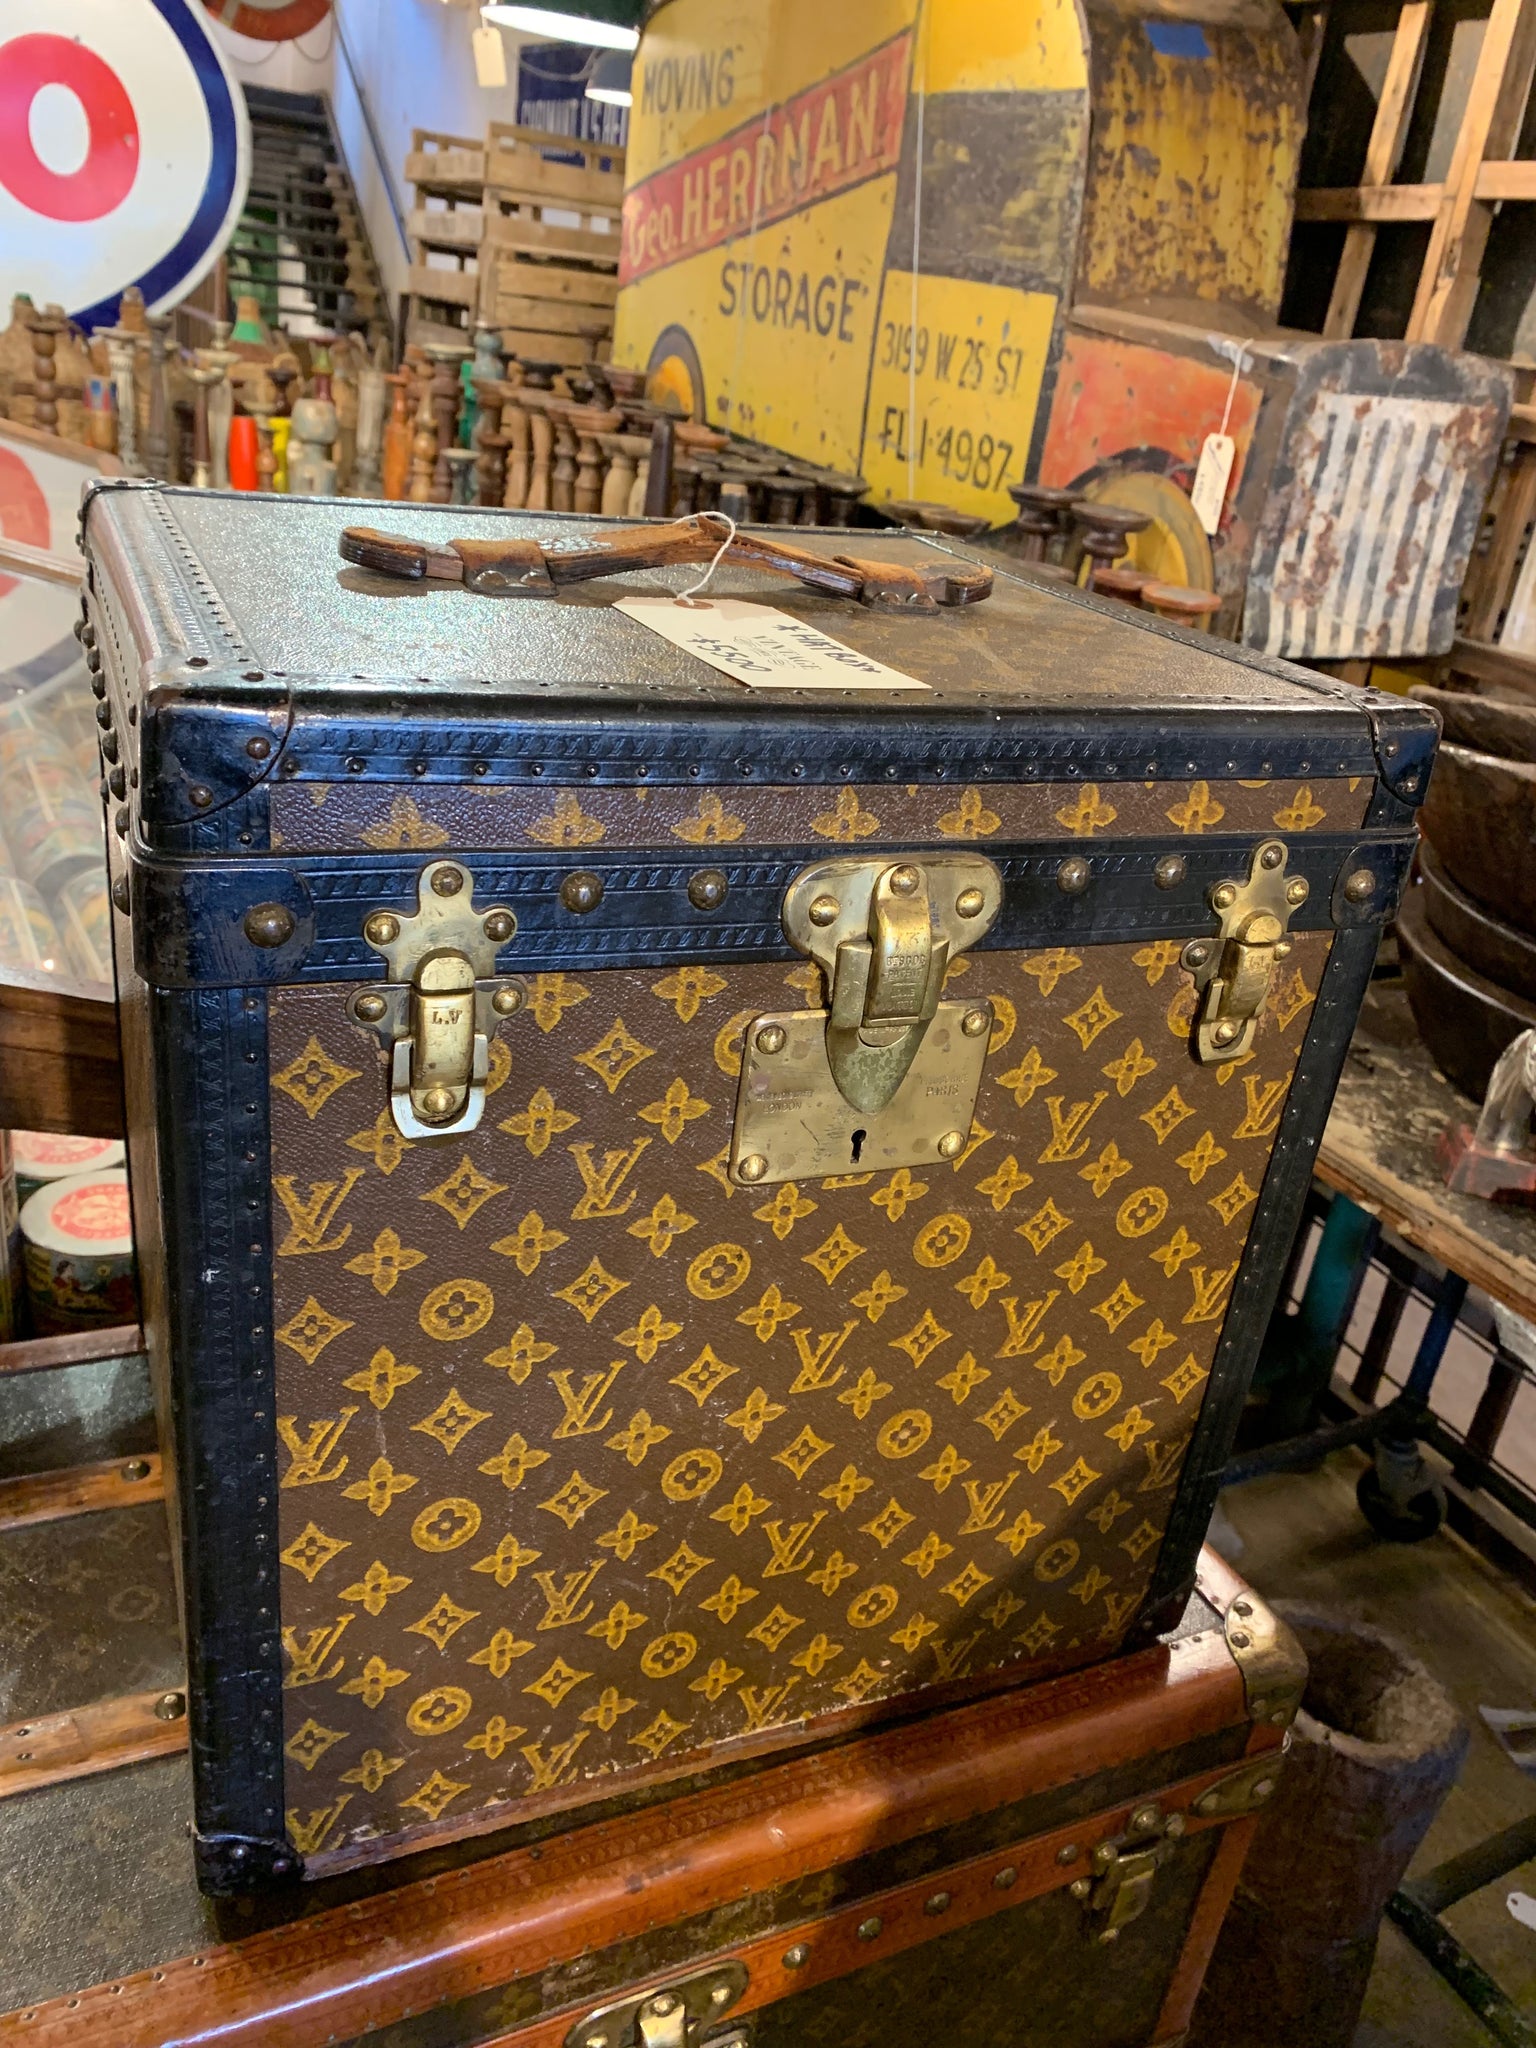 Louis Vuitton Shoe Trunk - 6 For Sale on 1stDibs  lv shoe trunk, louis  vuitton sneaker trunk price, louis vuitton shoe trunk price